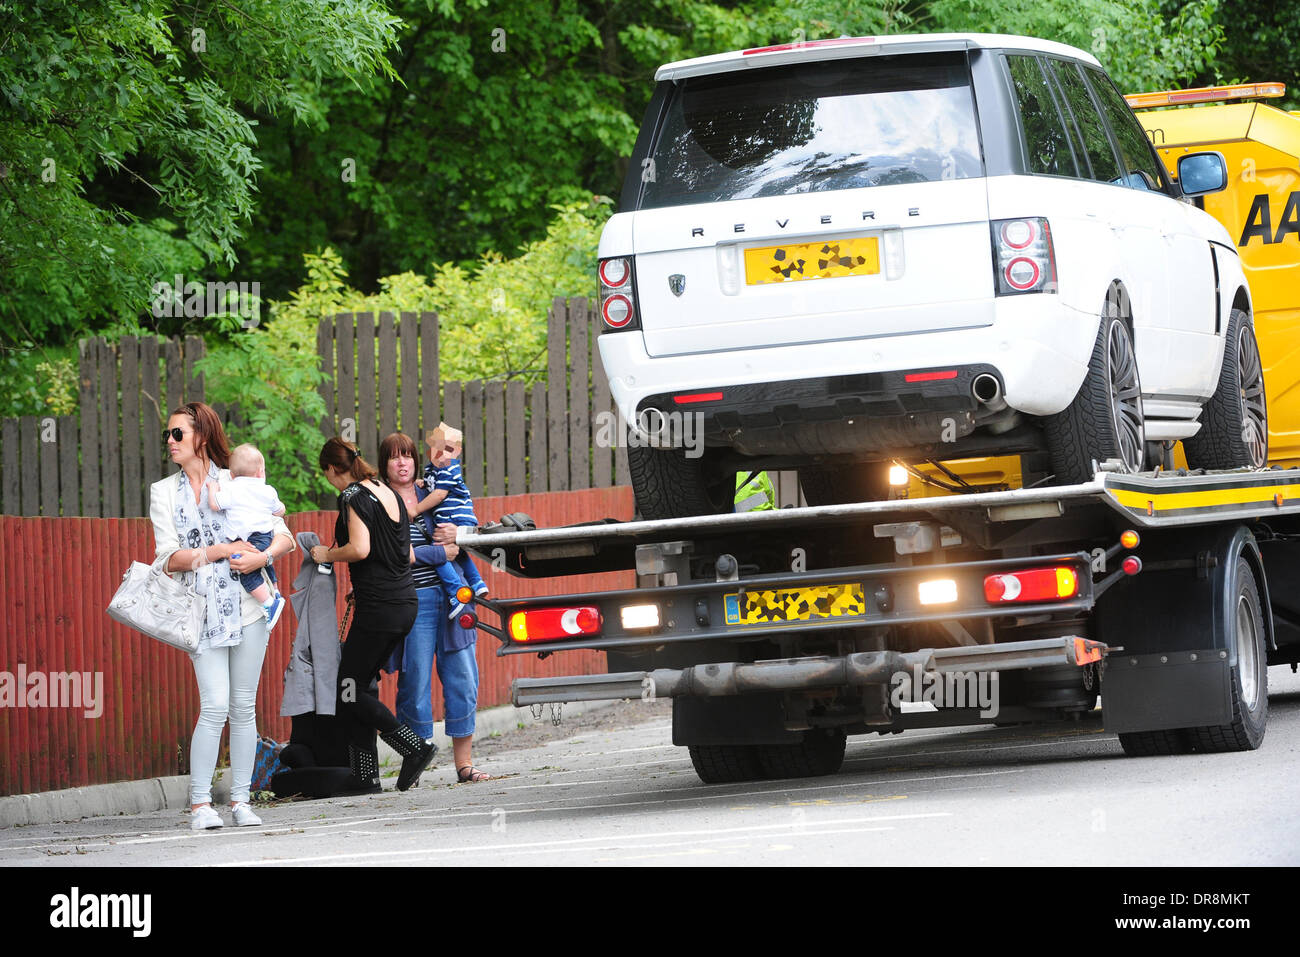 Danielle Lloyd  takes her children to a charity day at Camelot theme park, organised by the Liverpool Taxi drivers association.  Danielle was rescued at the roadside by the AA after her Range Rover broke down. Liverpool, England - 20.06.12 Stock Photo